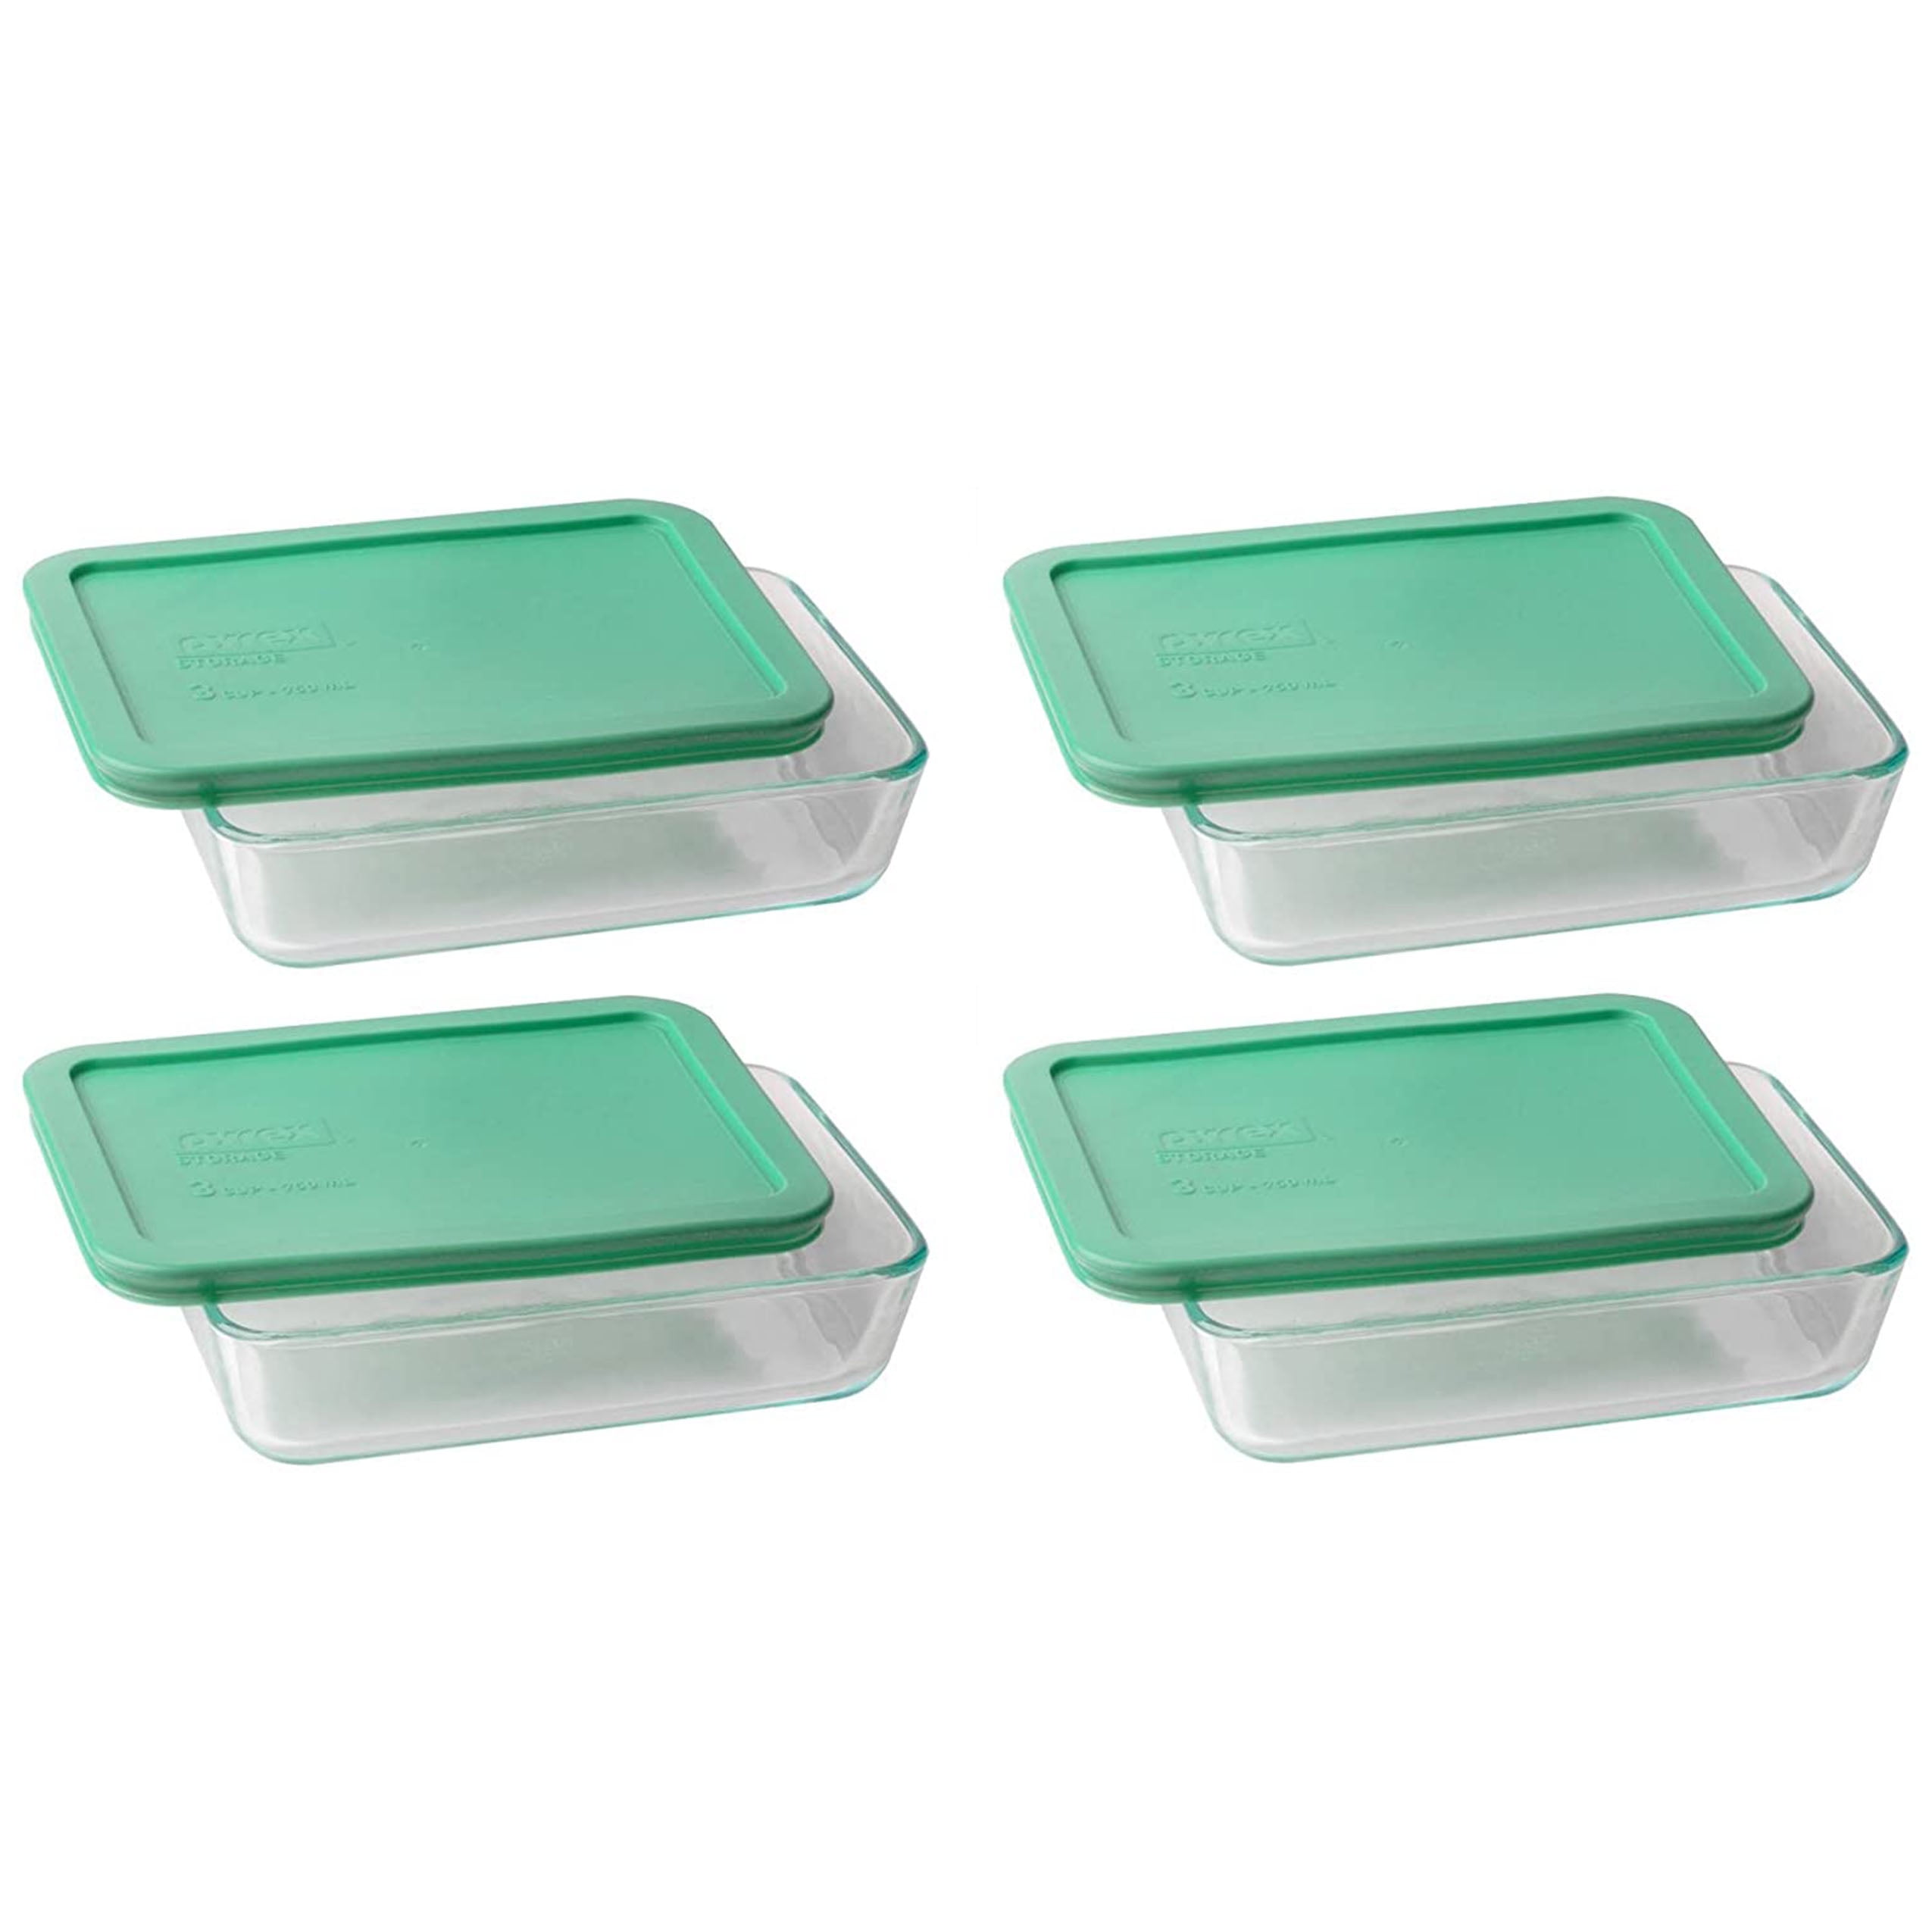 Pyrex 7210-Pc Rectangle 3 Cup Storage Lid For Glass Dish 4, Light Green 